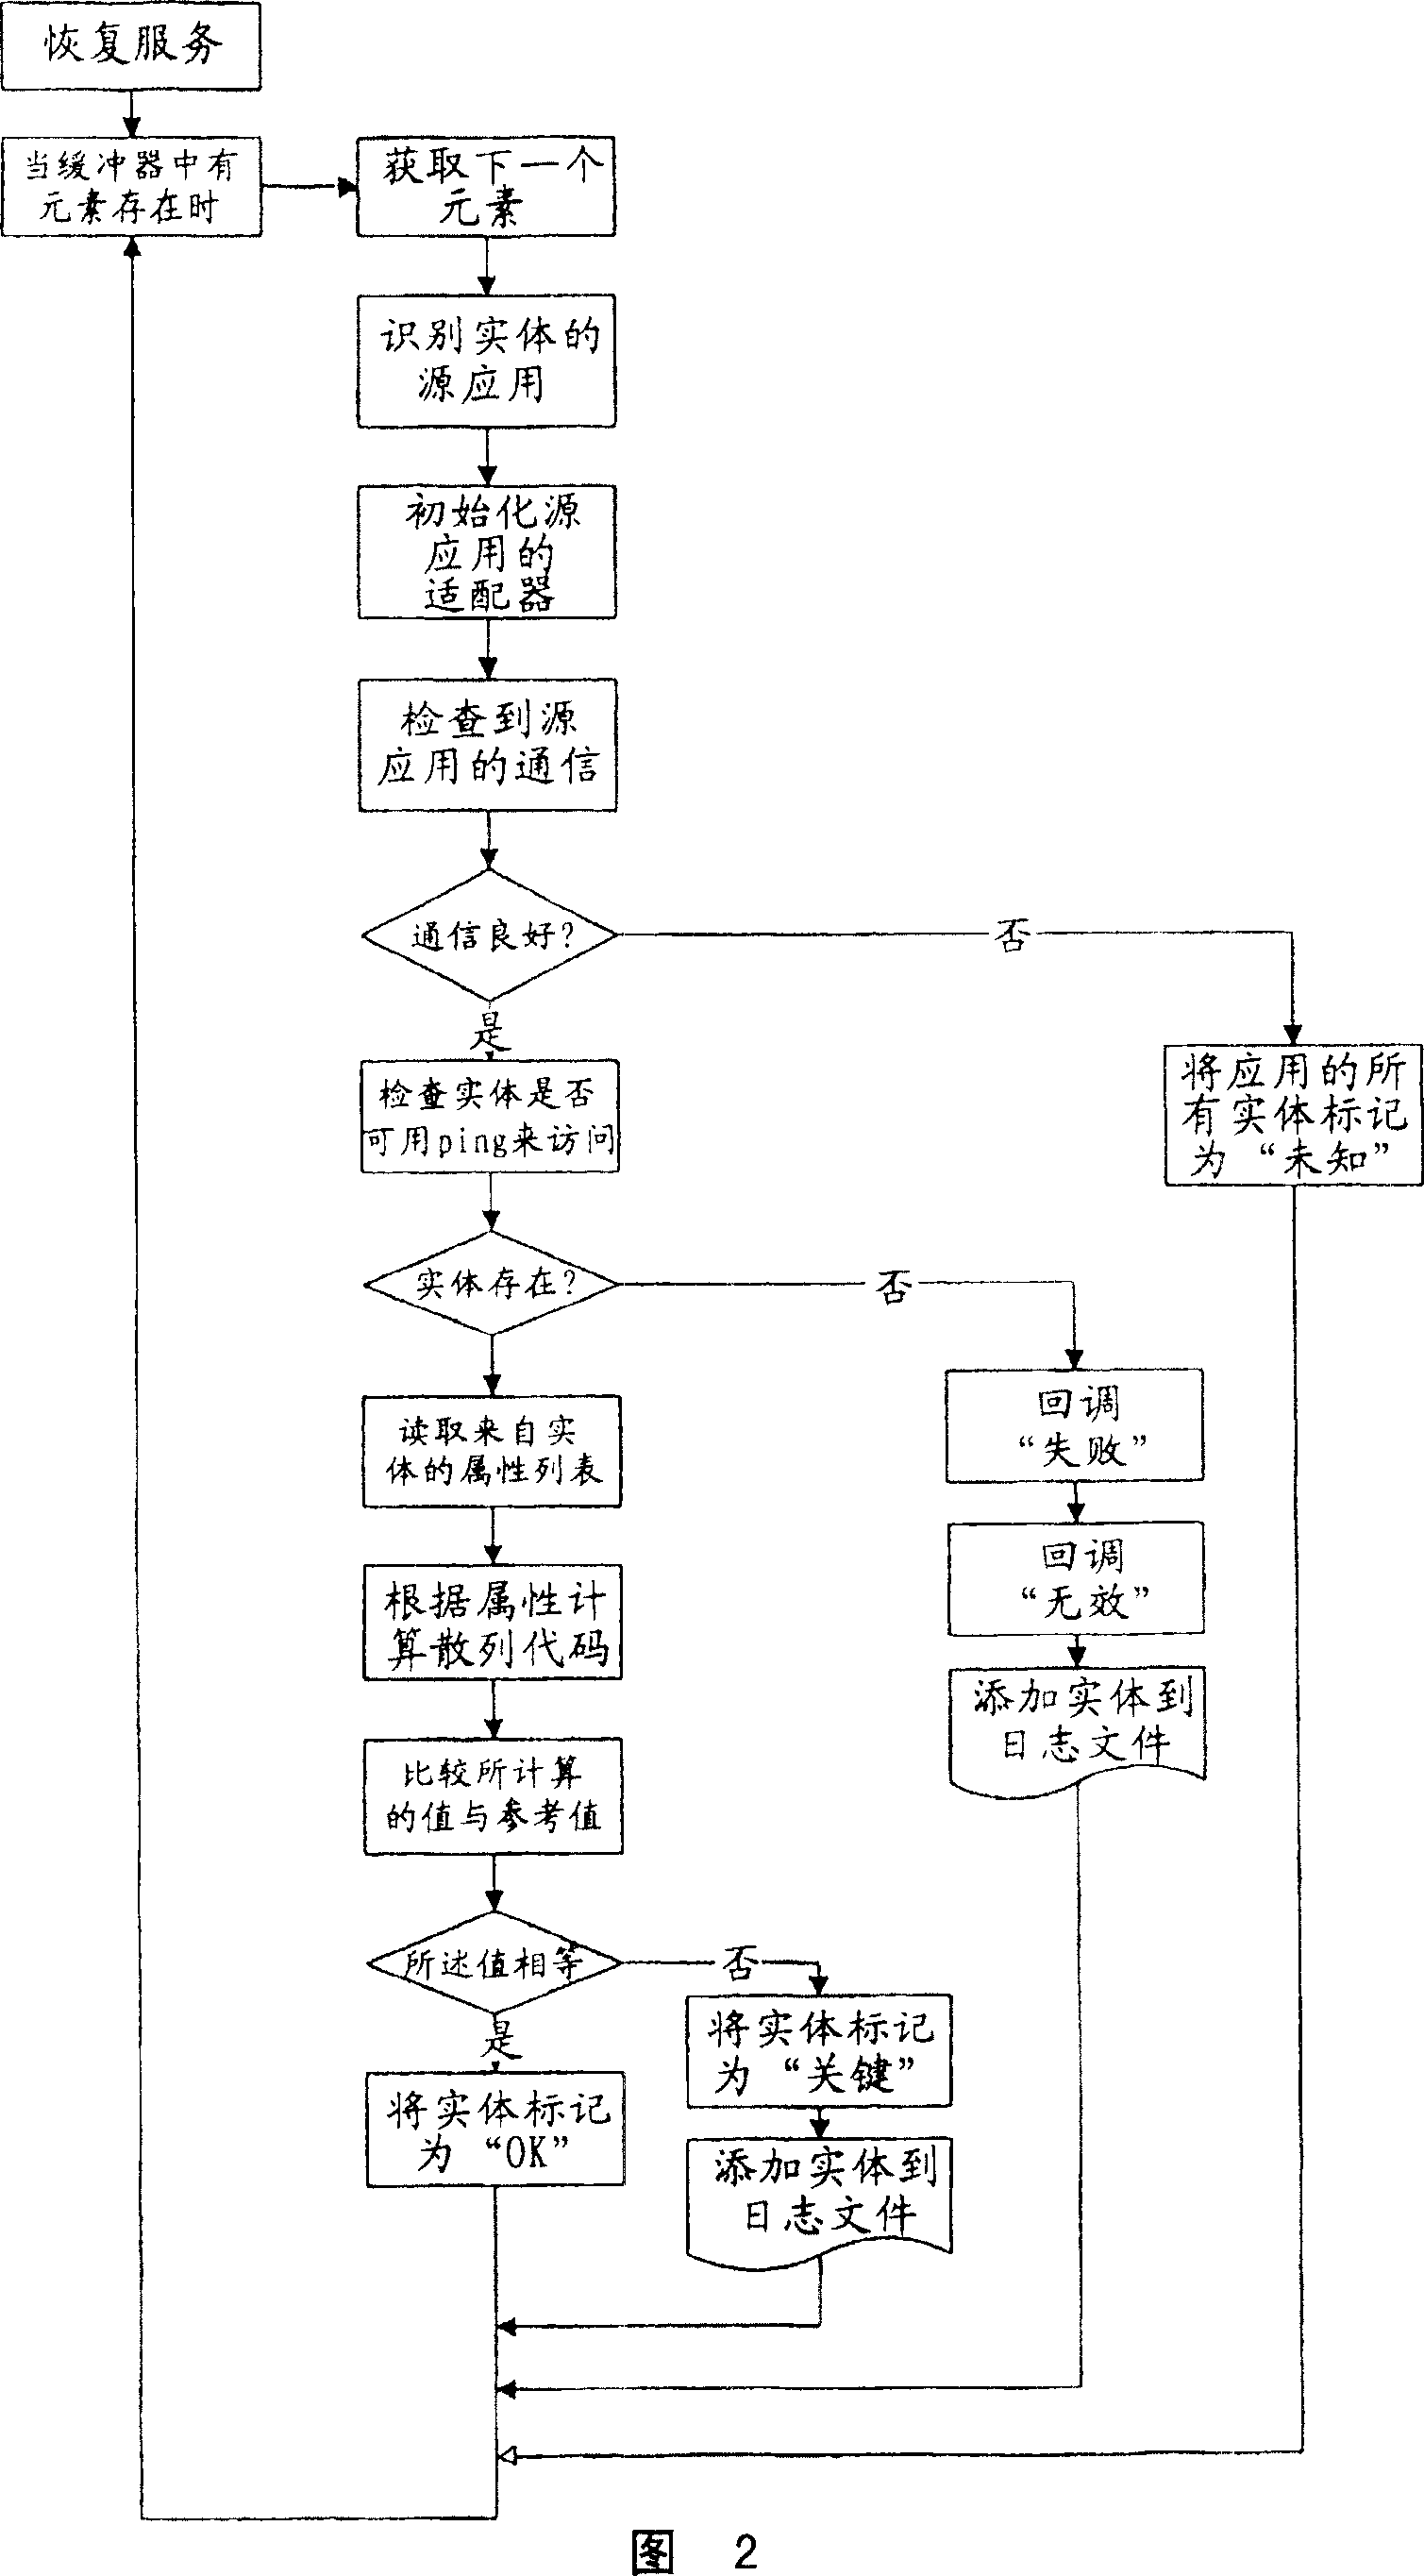 Device and method for data consistency checking